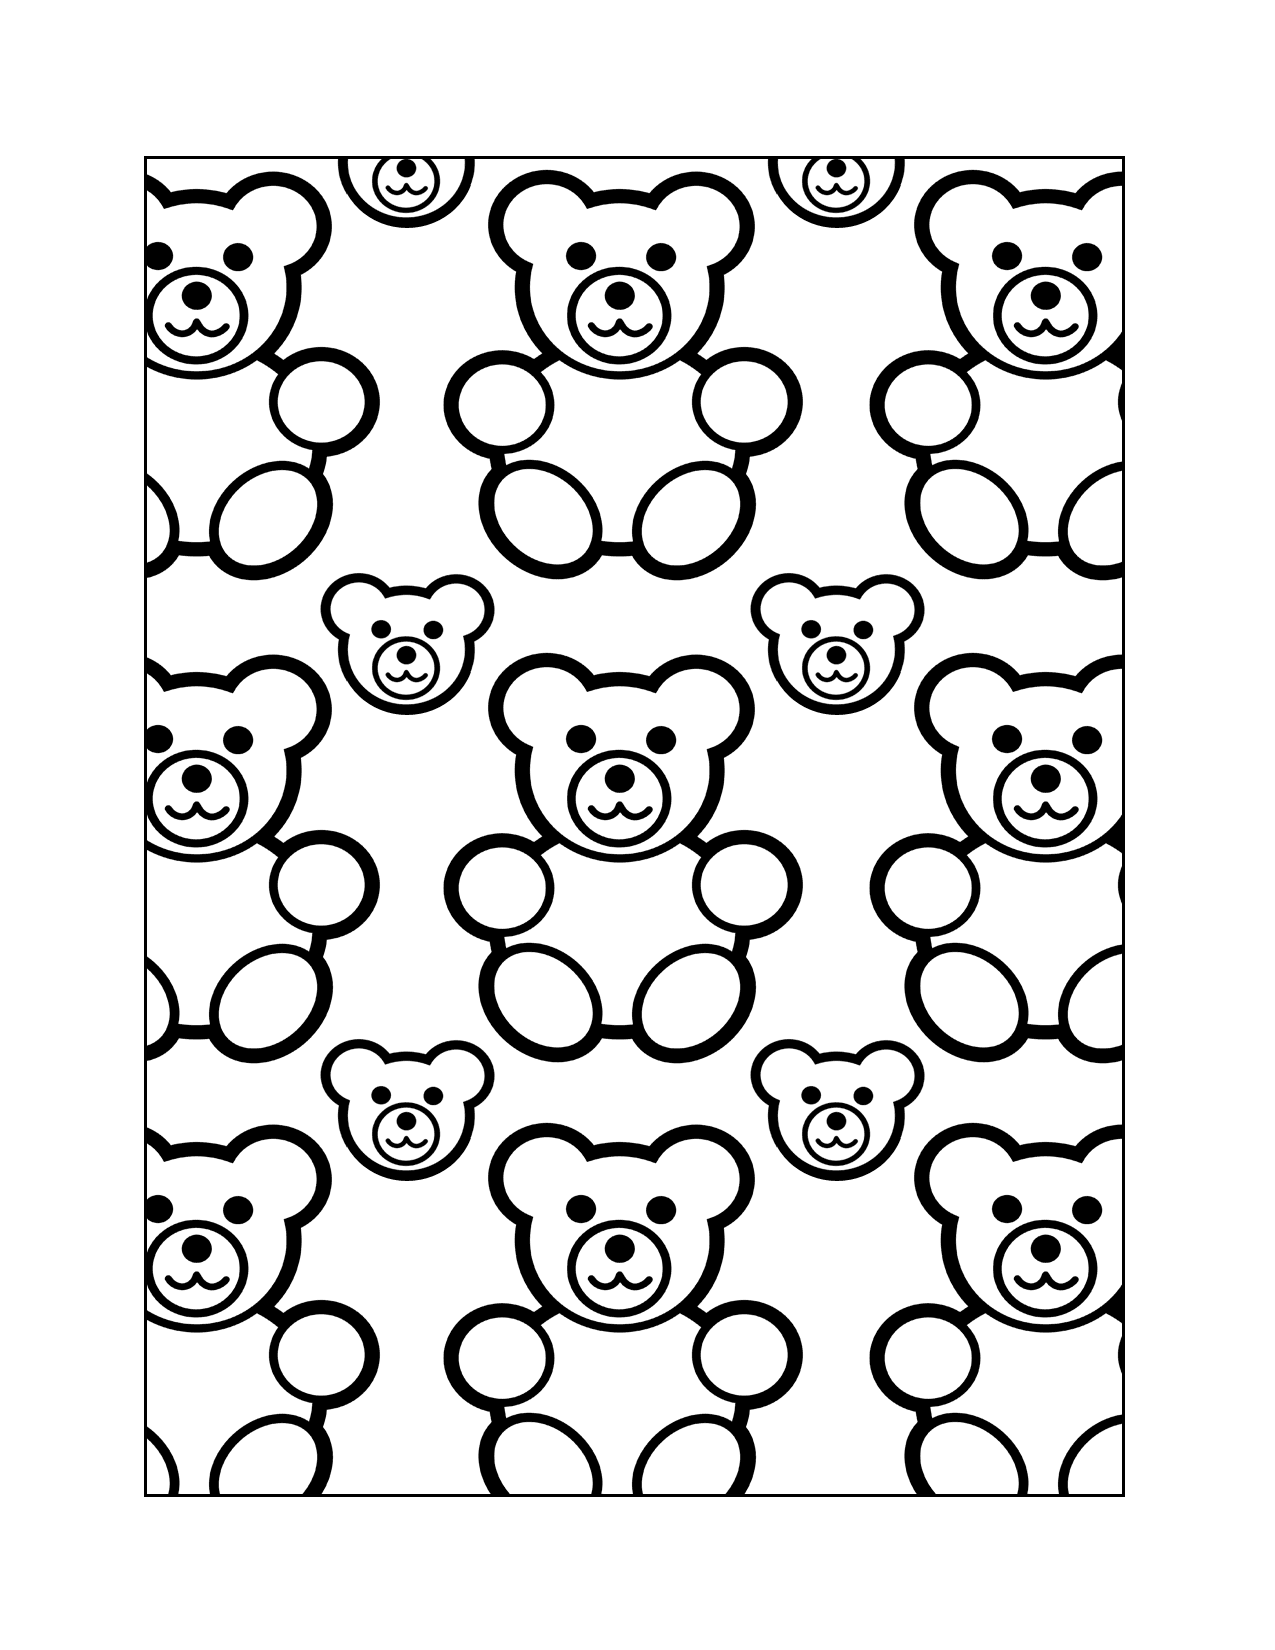 Teddy Bear Pattern Coloring Page